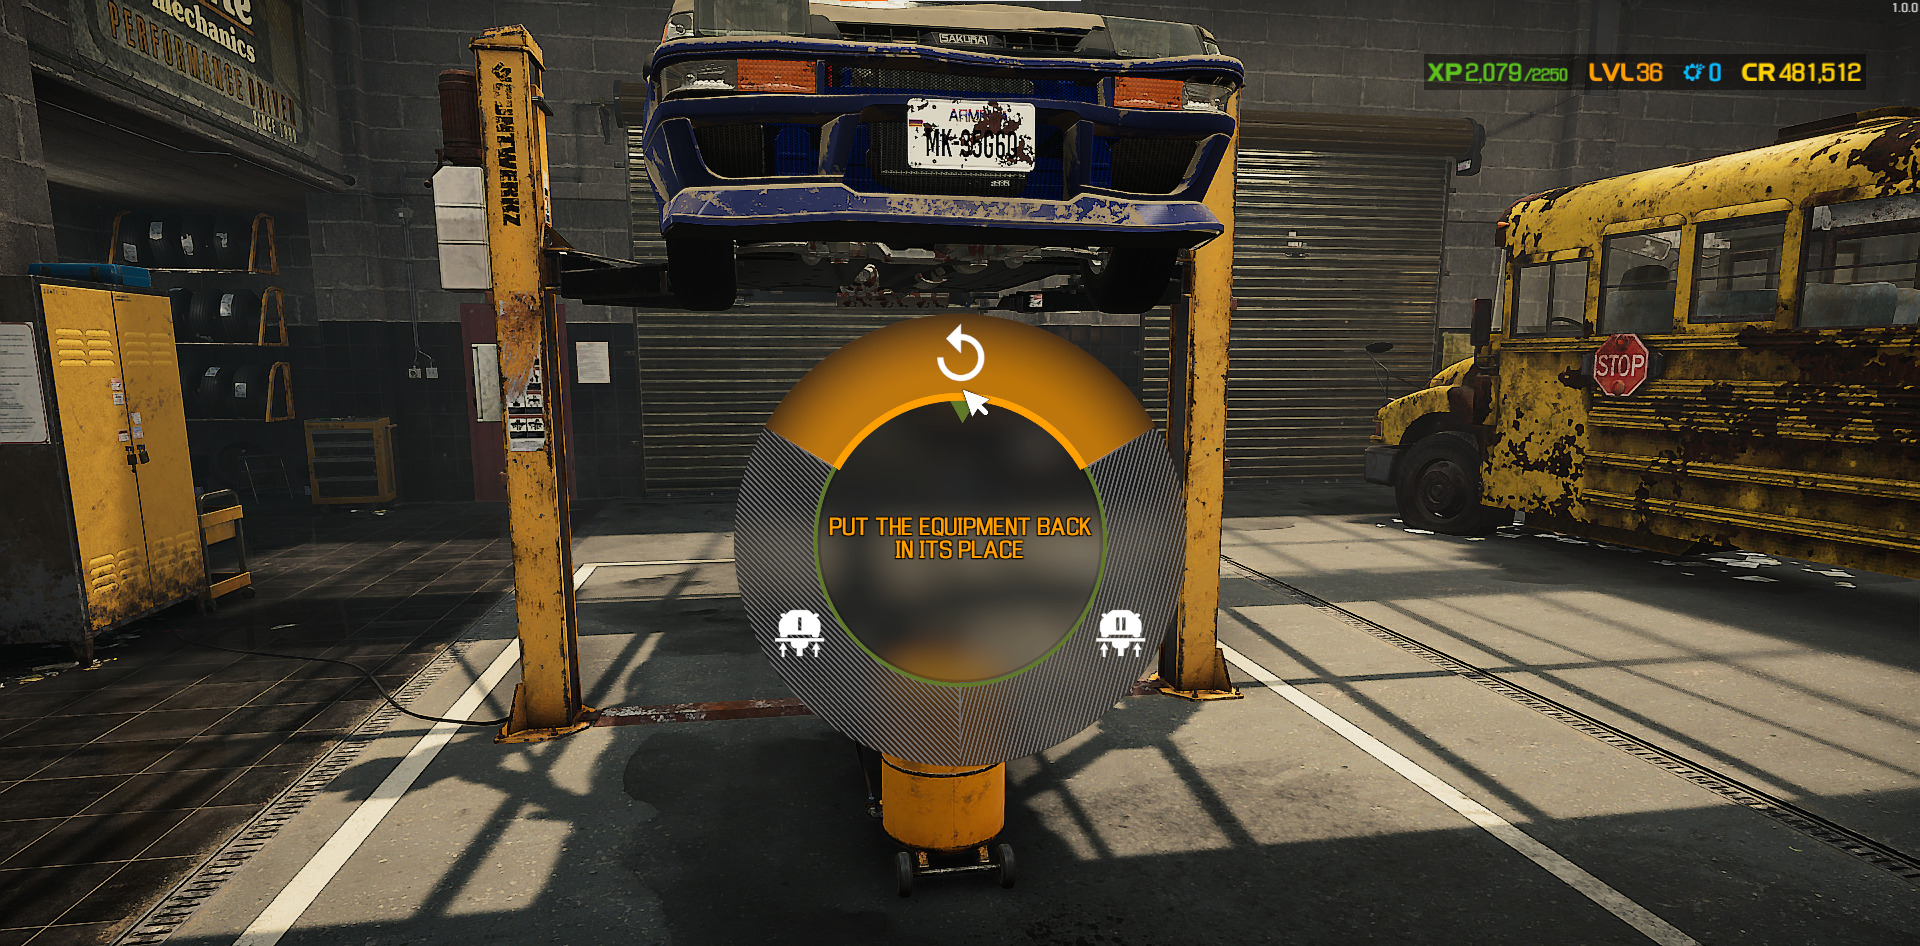 A screenshot showing the "Put the Equipment Back in Its Place" command in Car Mechanic Simulator